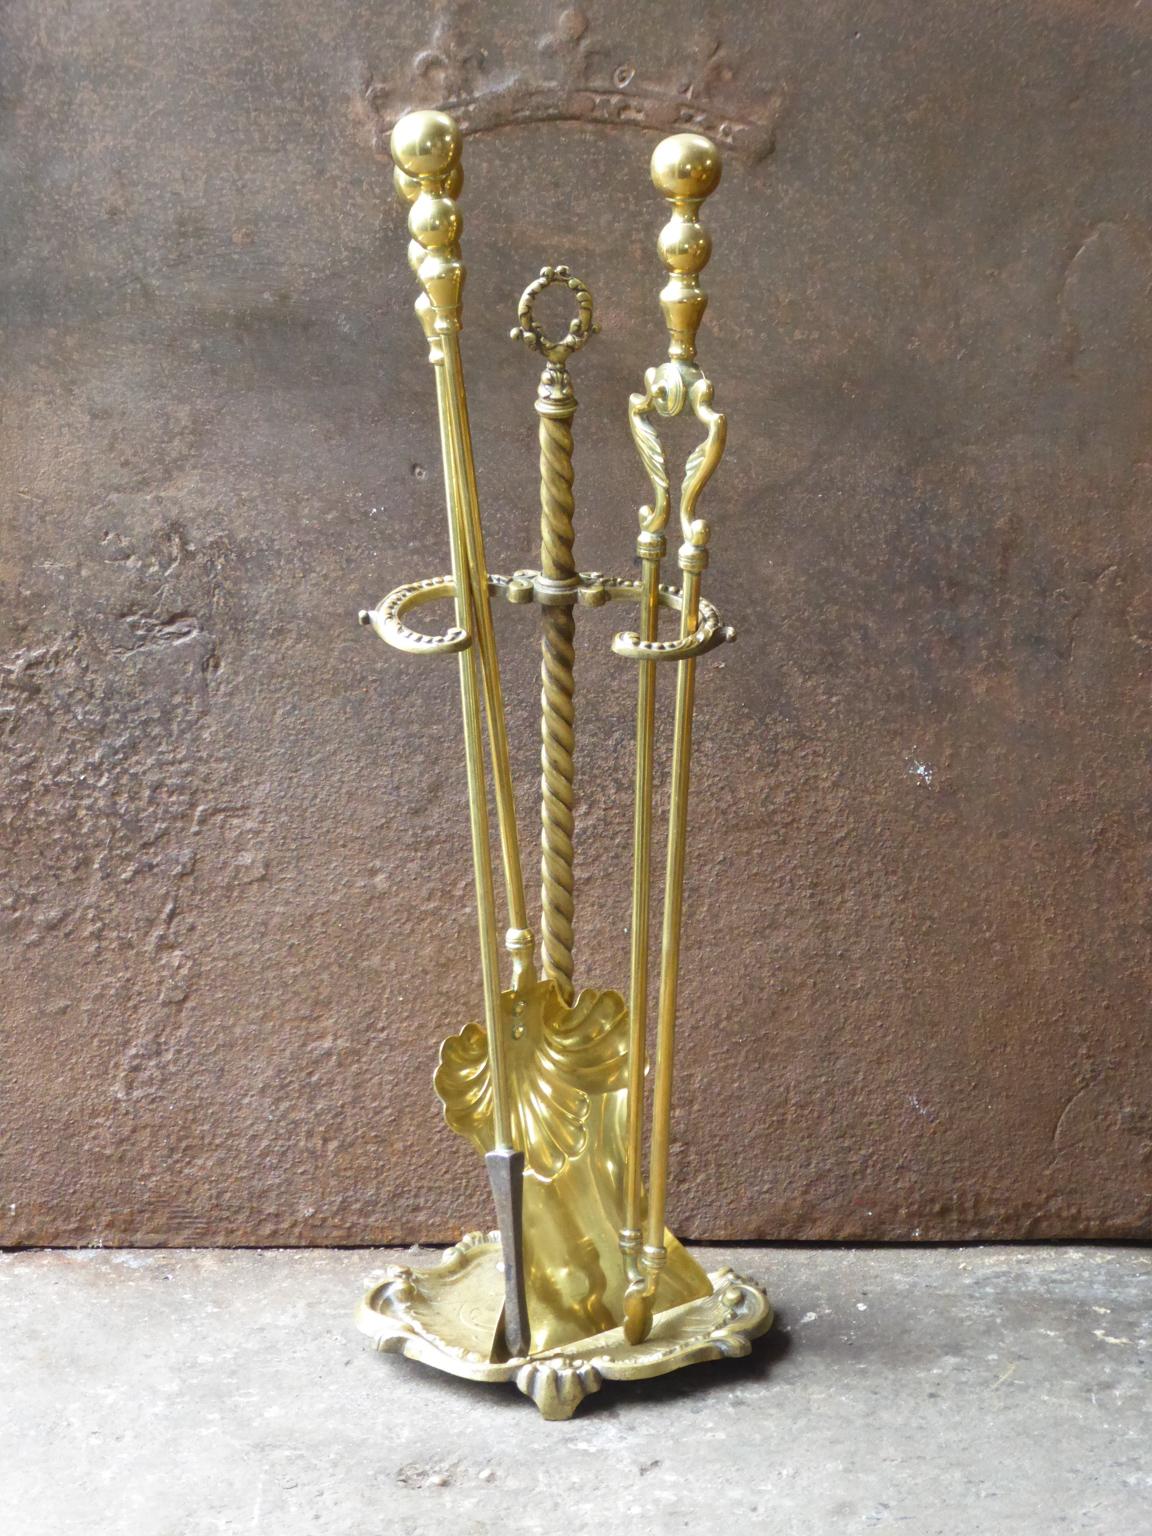 English set of three fireplace tools and a stand, made of brass. The fire tool set is in a good condition and is fully functional. 19th century, Victorian.